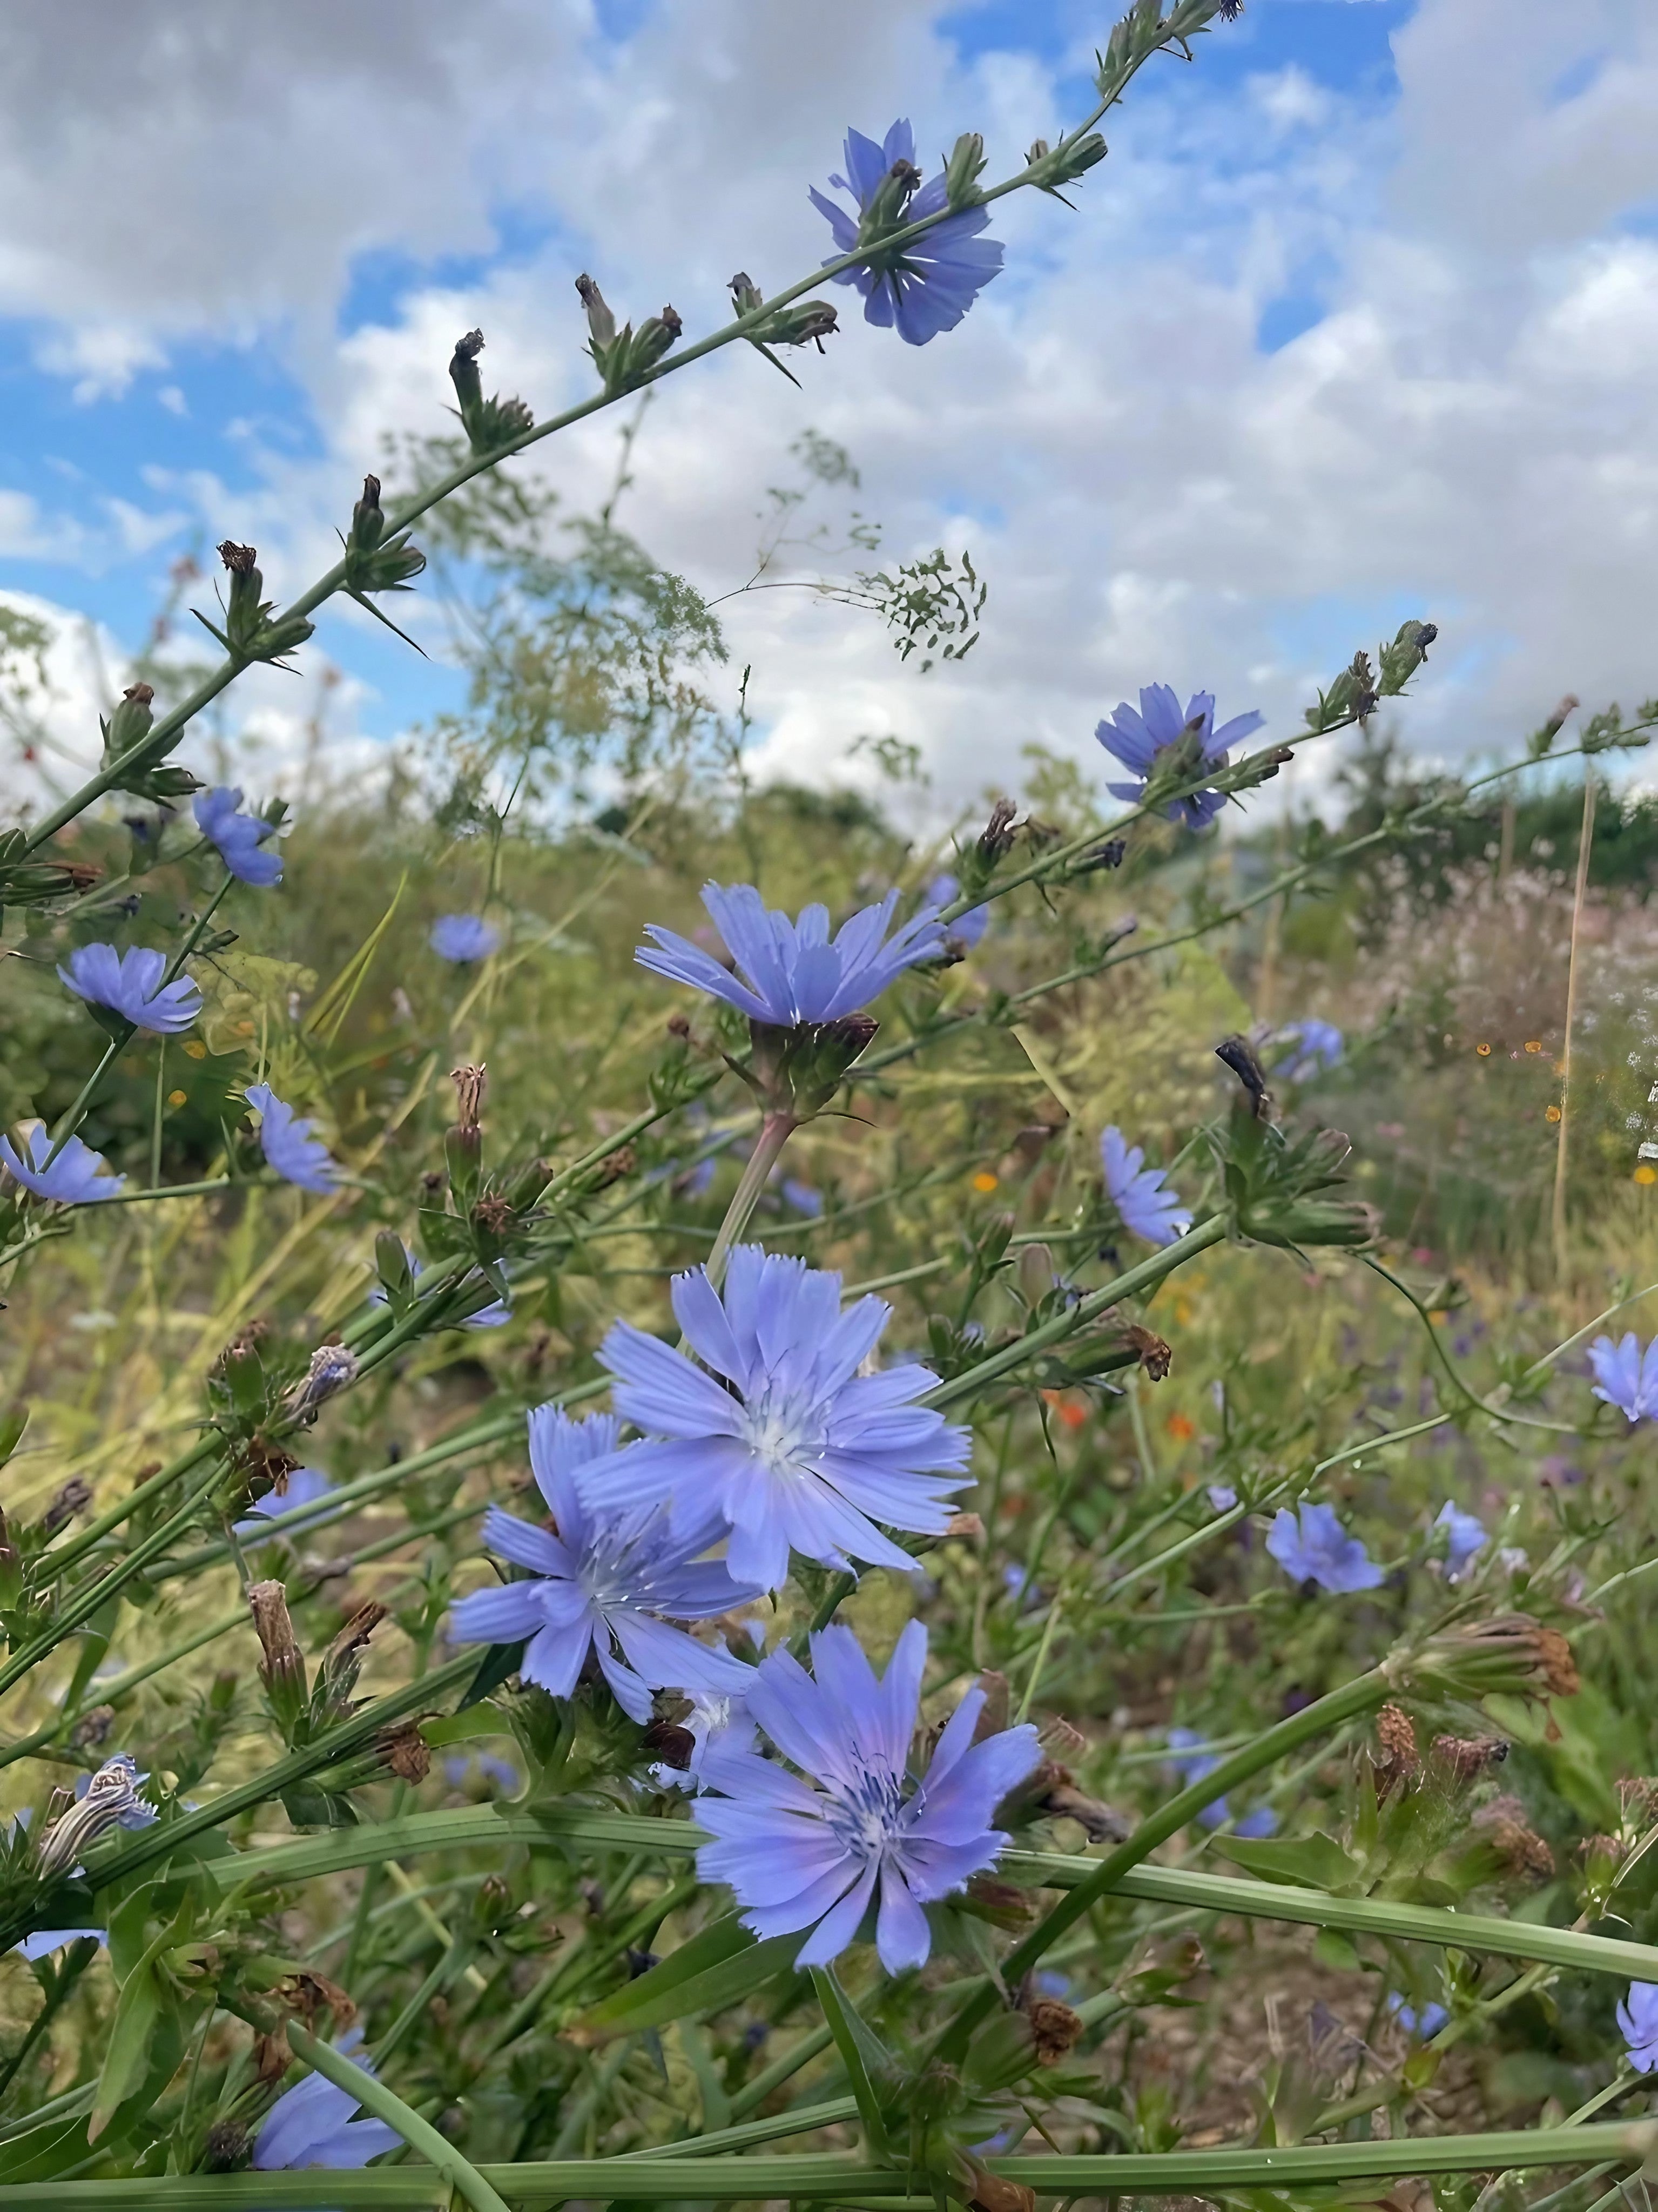 A scenic view of Chicory Wild flowers against the backdrop of a clear blue sky